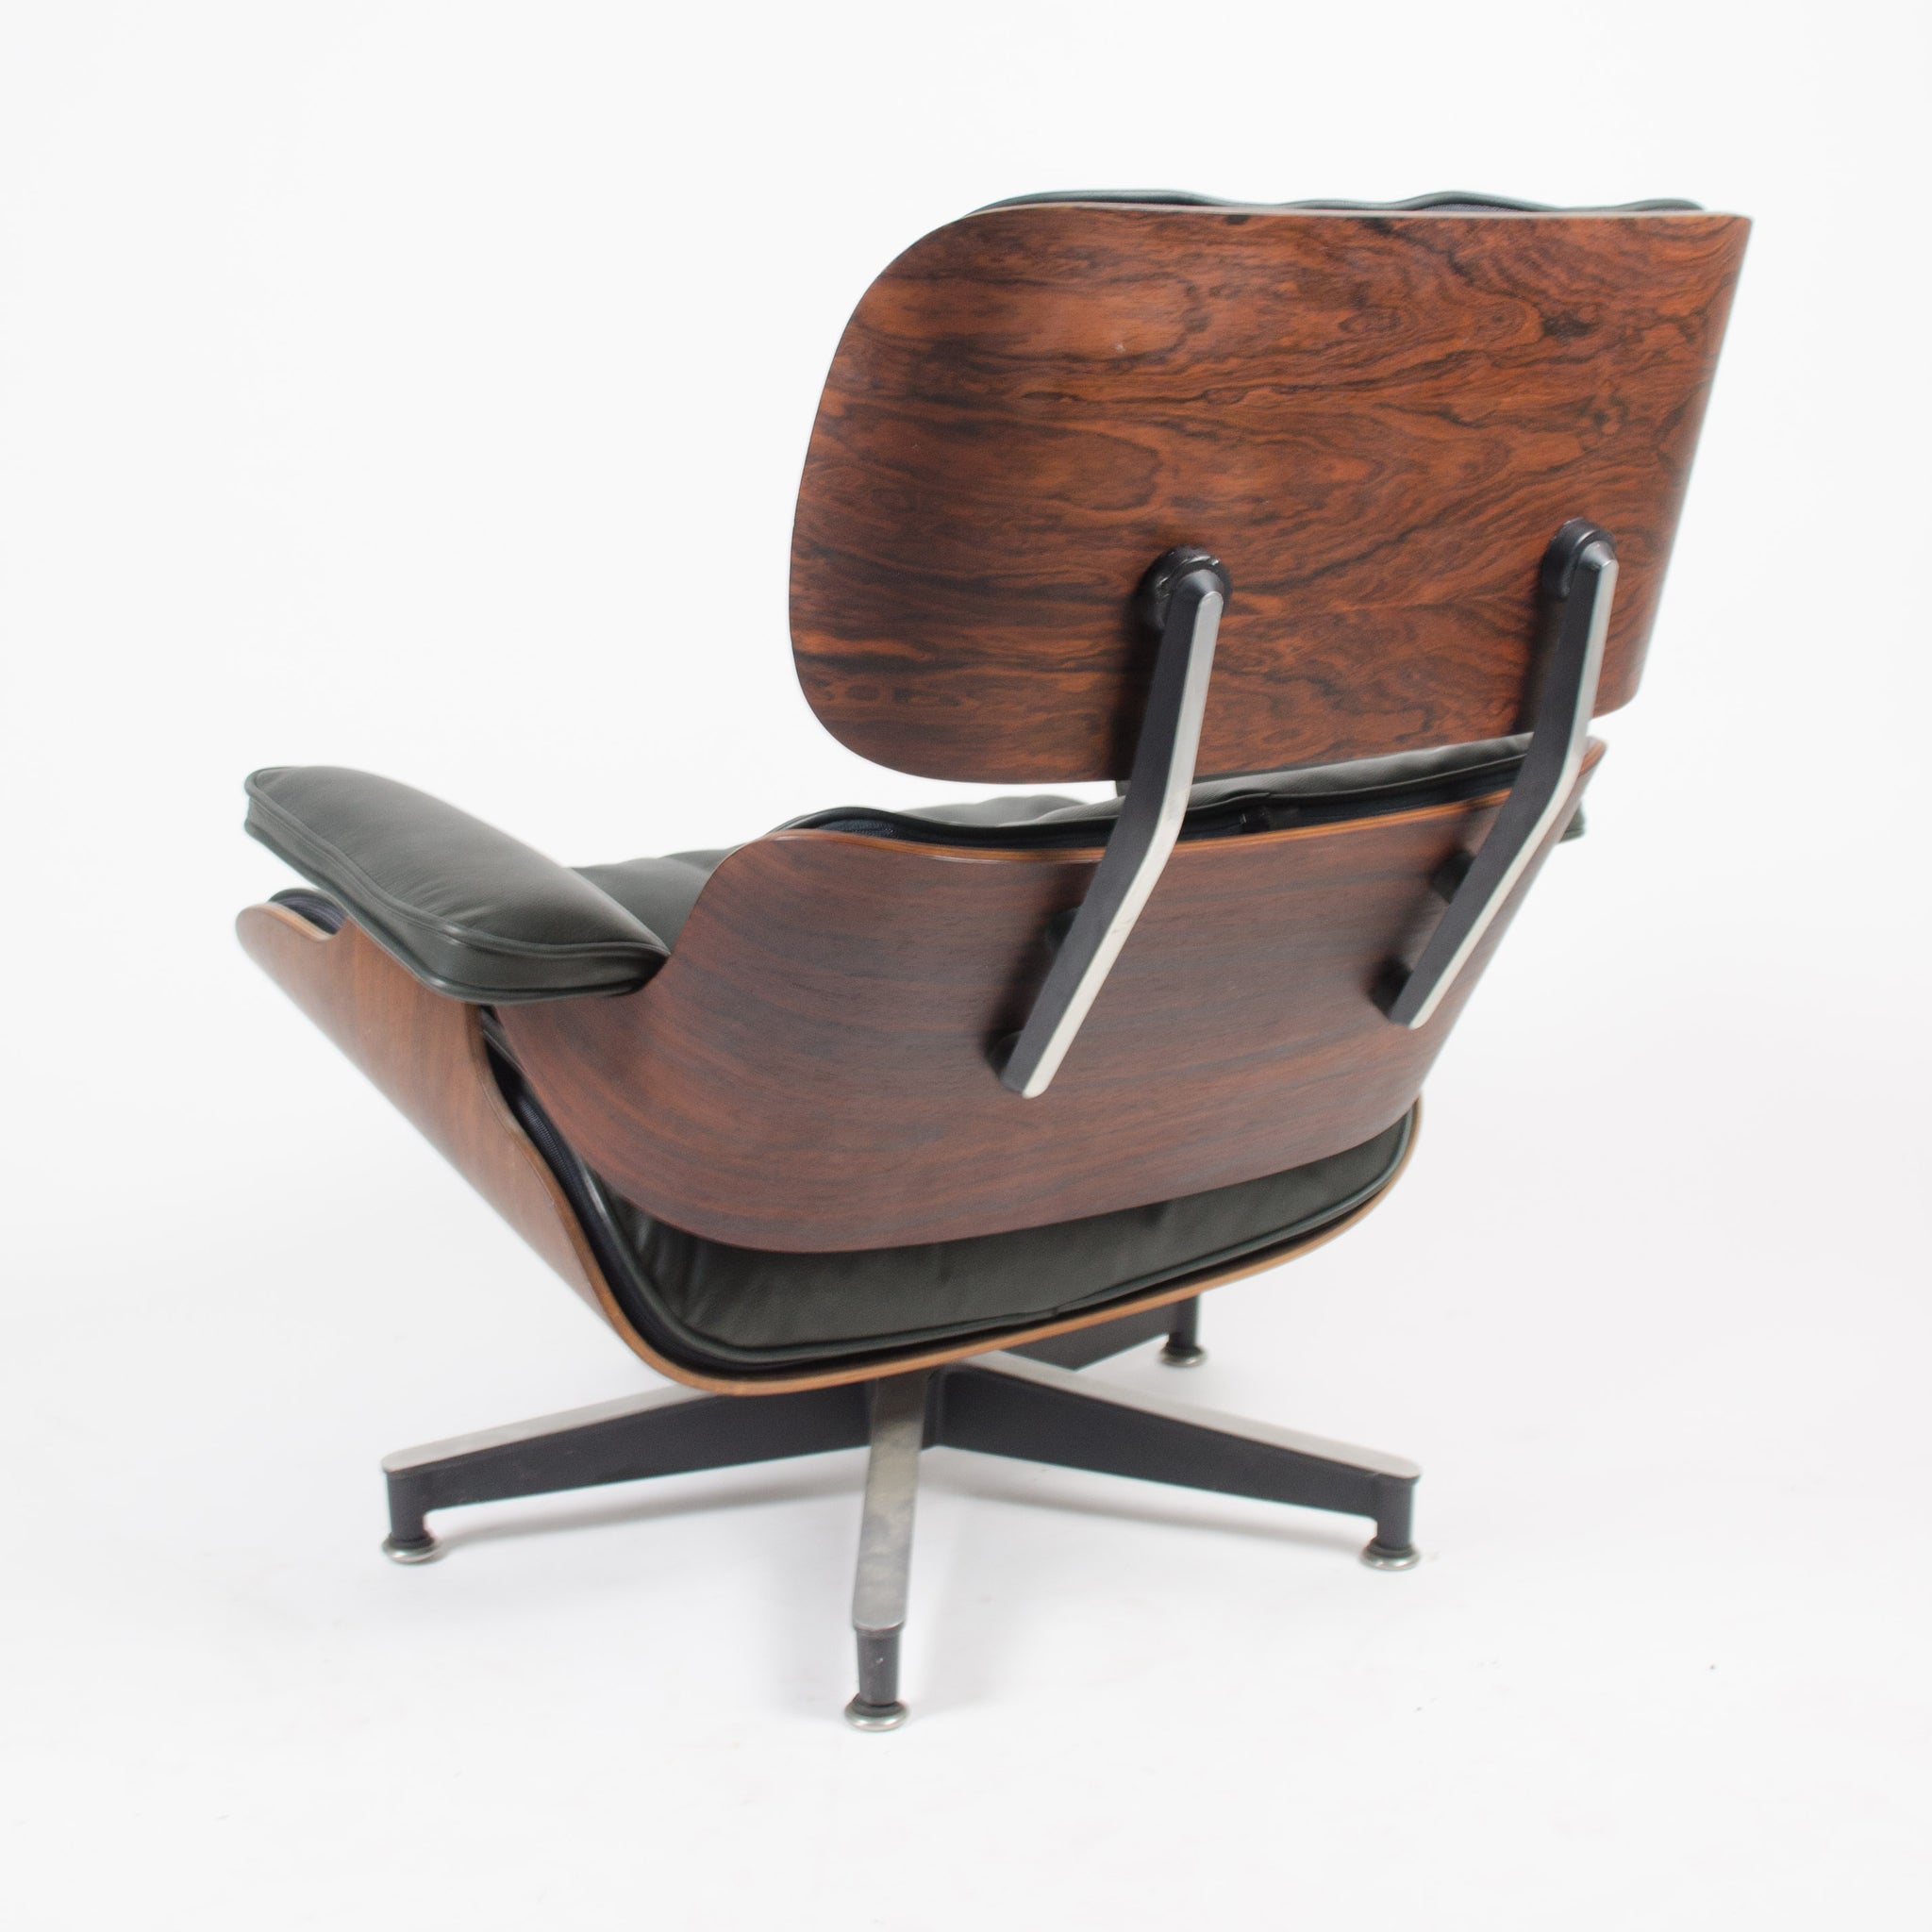 SOLD 1959 Herman Miller Eames Lounge Chair & Ottoman Rosewood Brand New Cushions